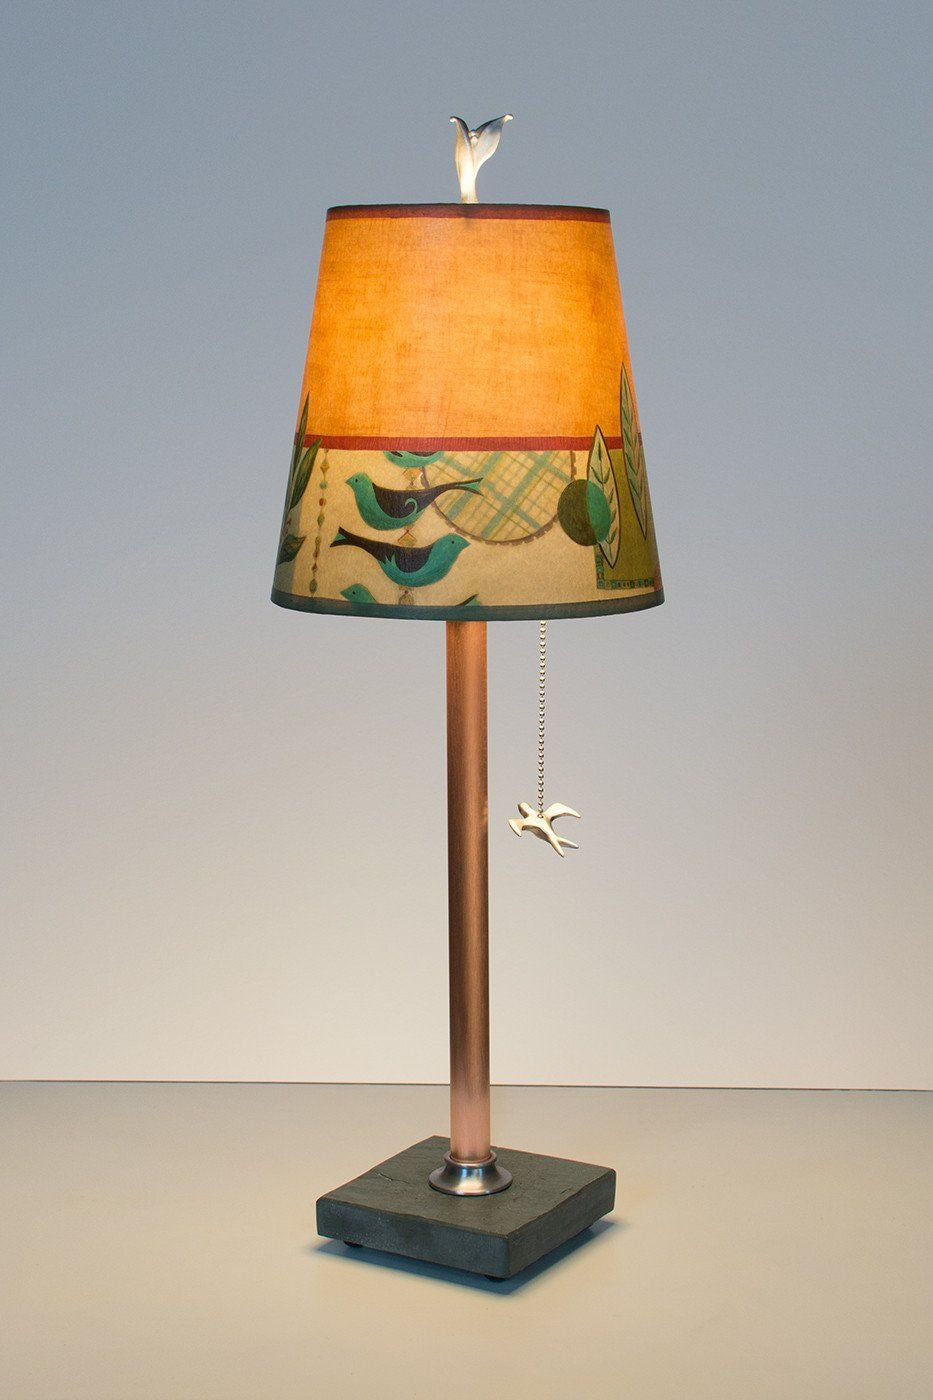 Janna Ugone & Co Table Lamps Copper Table Lamp with Small Drum Shade in New Capri Spice